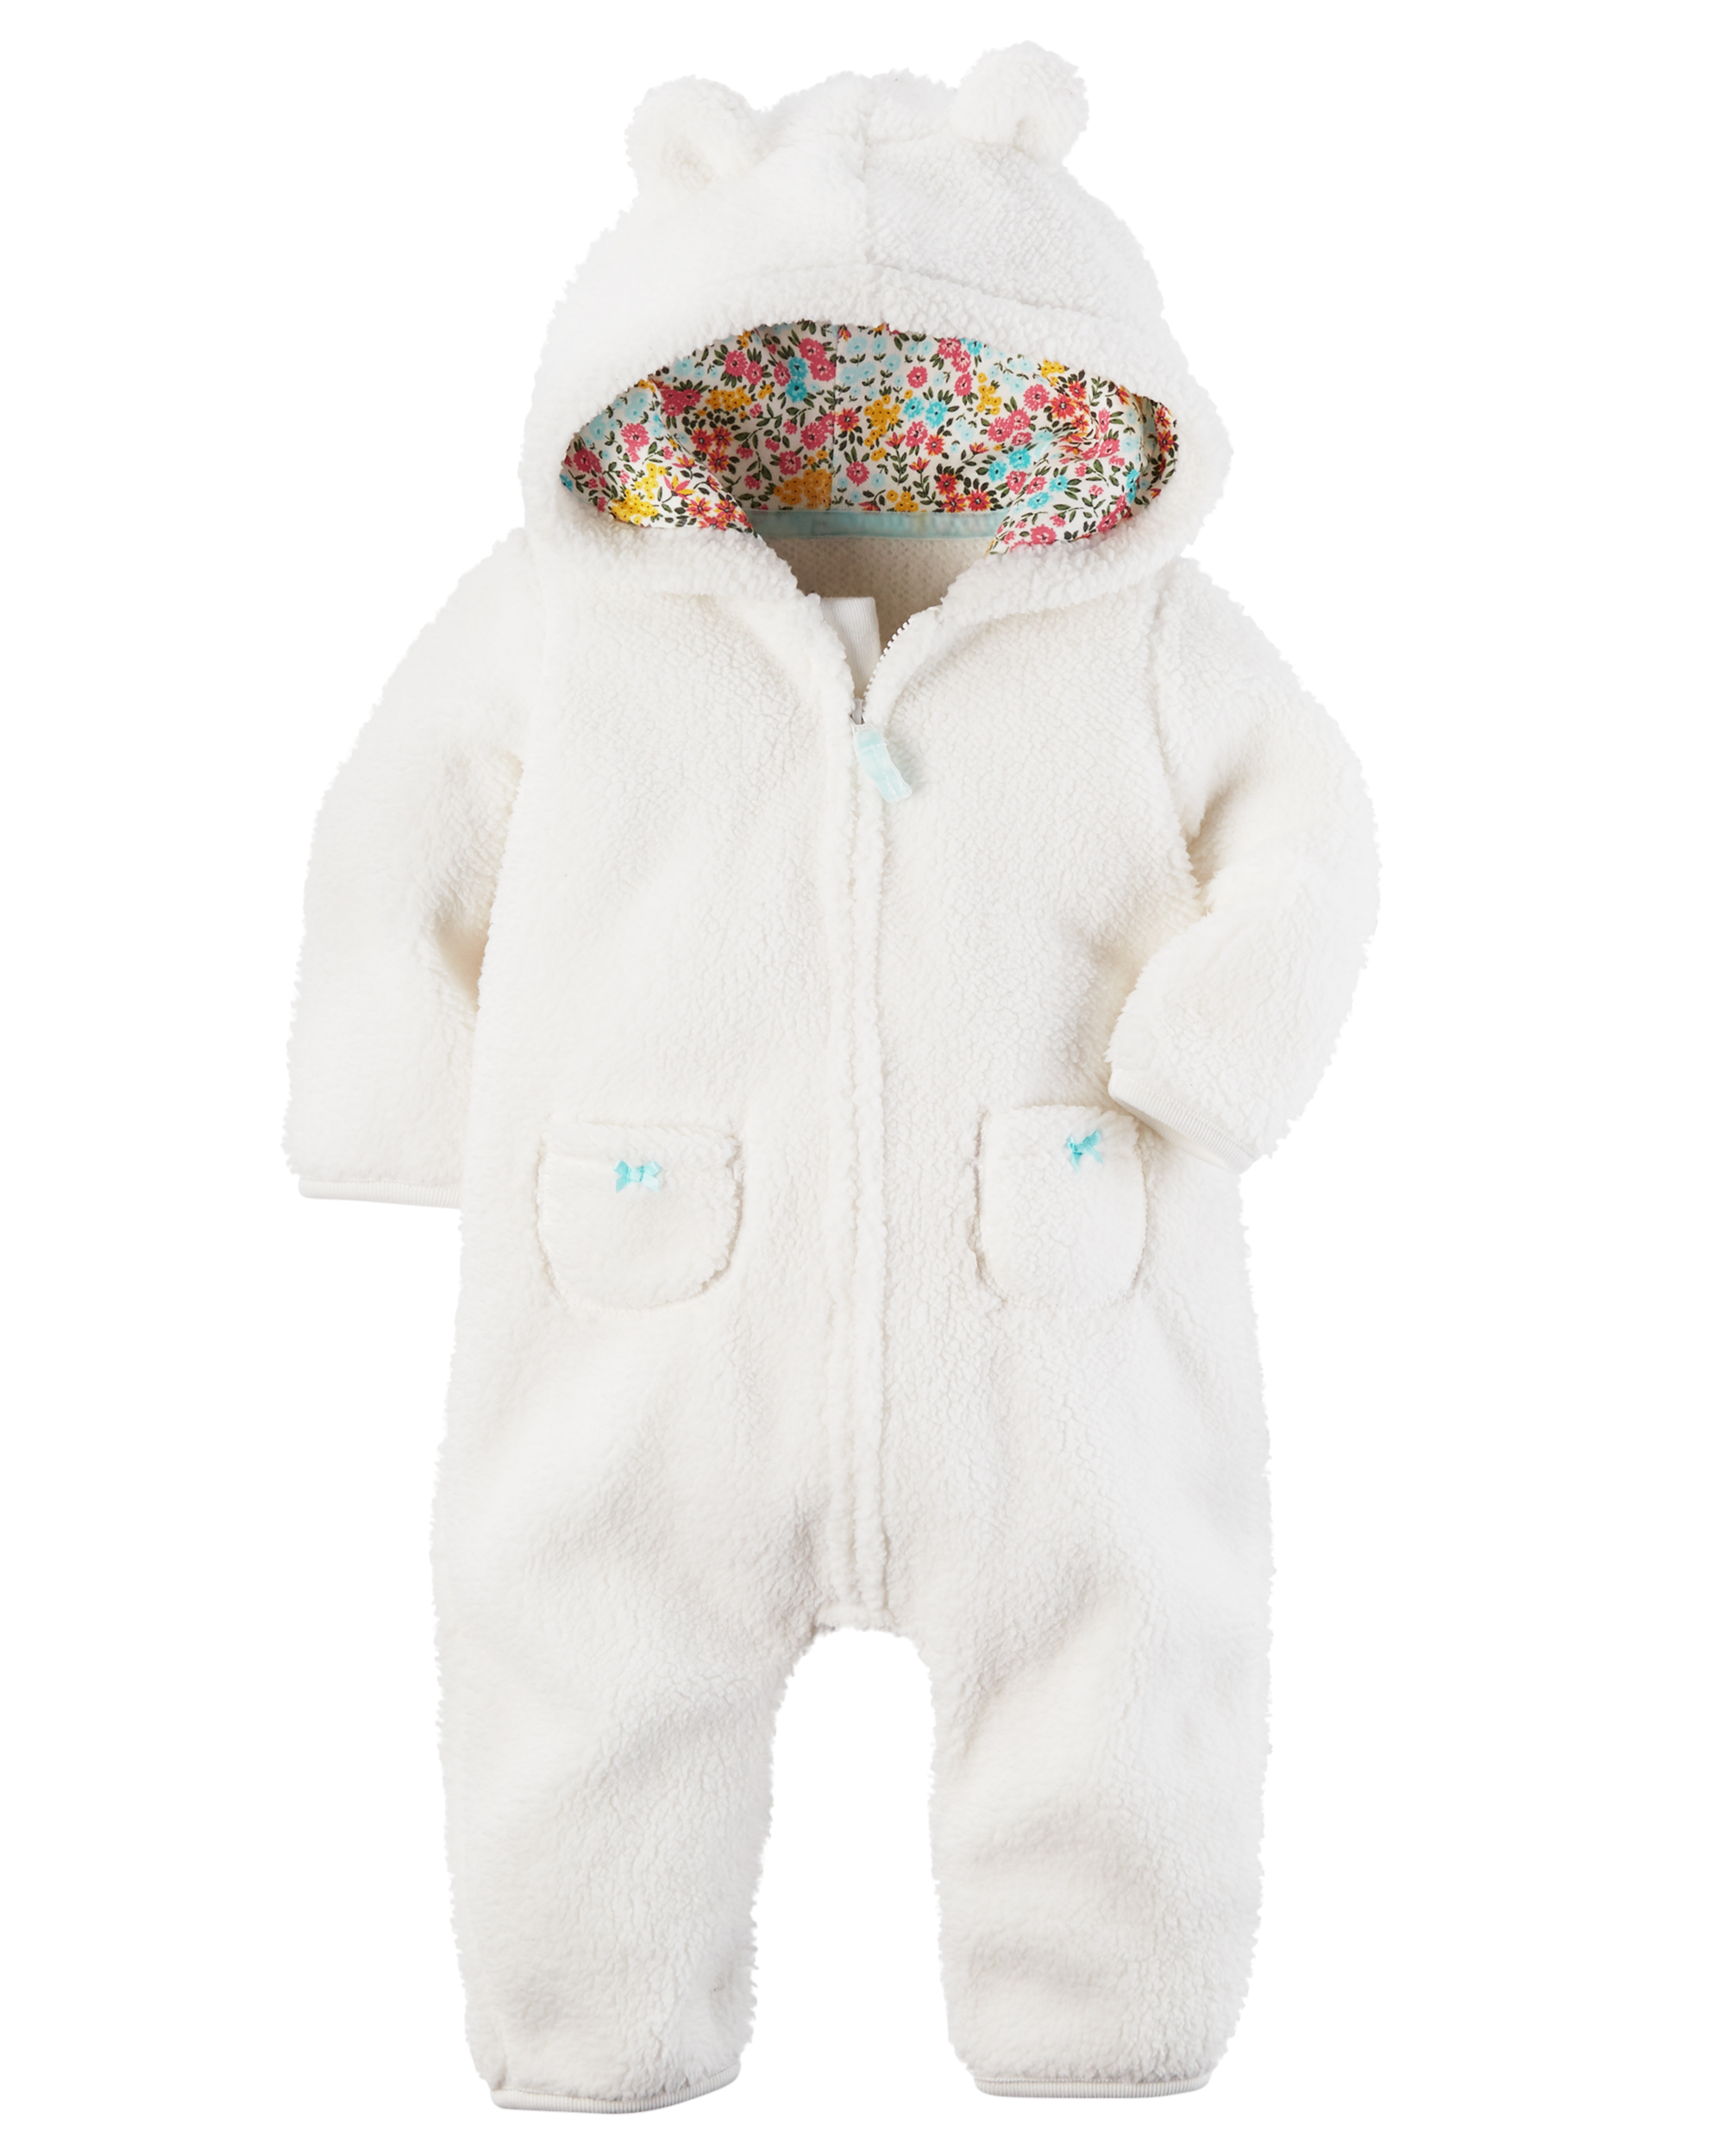 Carters Baby Girl's Jumpsuit  Lined Hood "CUTE" NB New 6M 9M or 12M 3M 